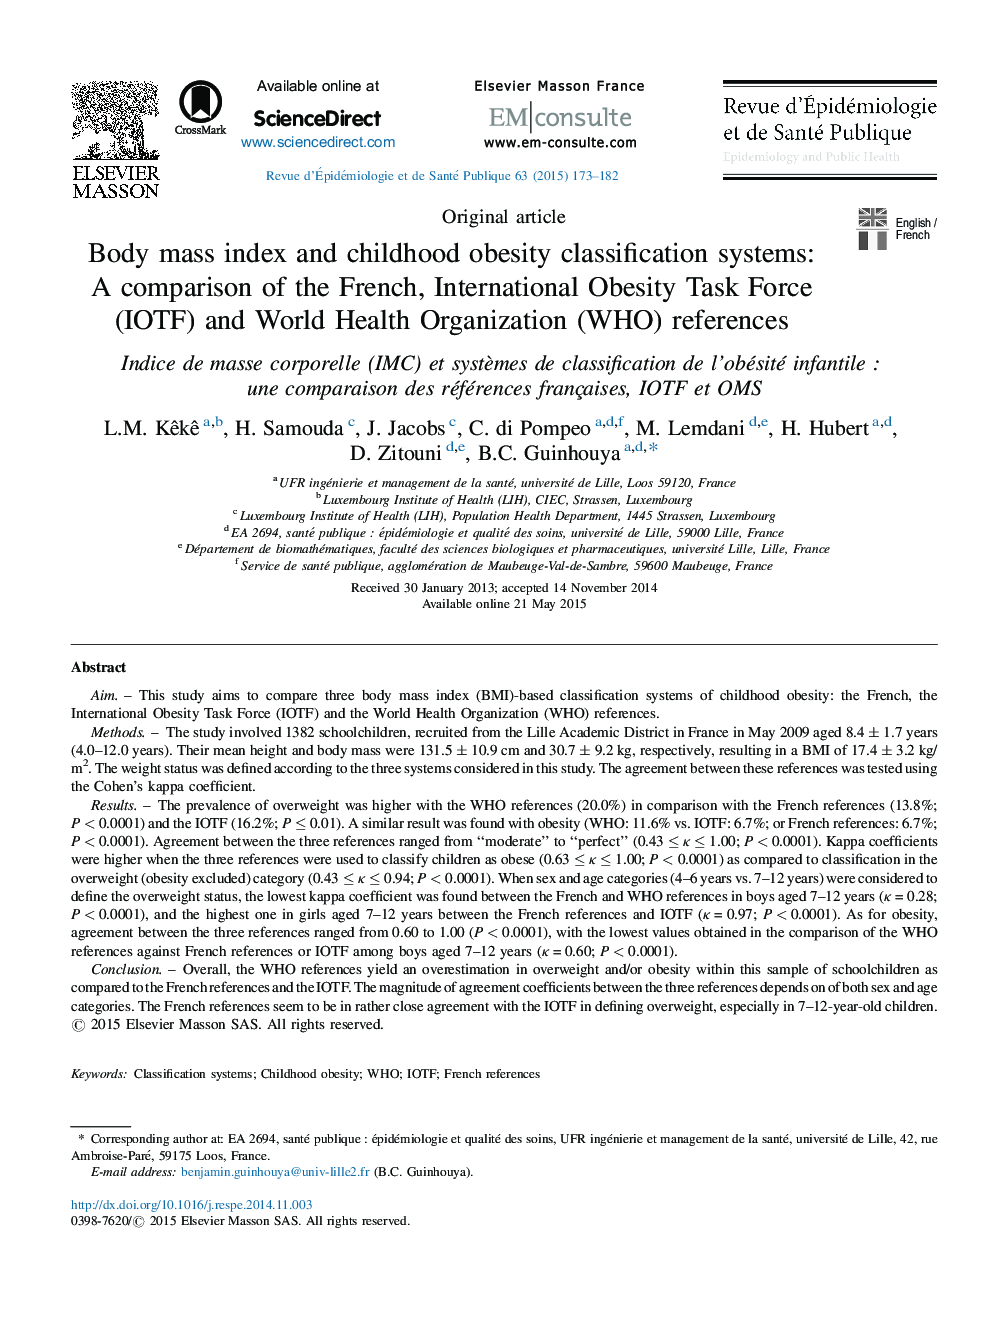 Body mass index and childhood obesity classification systems: A comparison of the French, International Obesity Task Force (IOTF) and World Health Organization (WHO) references